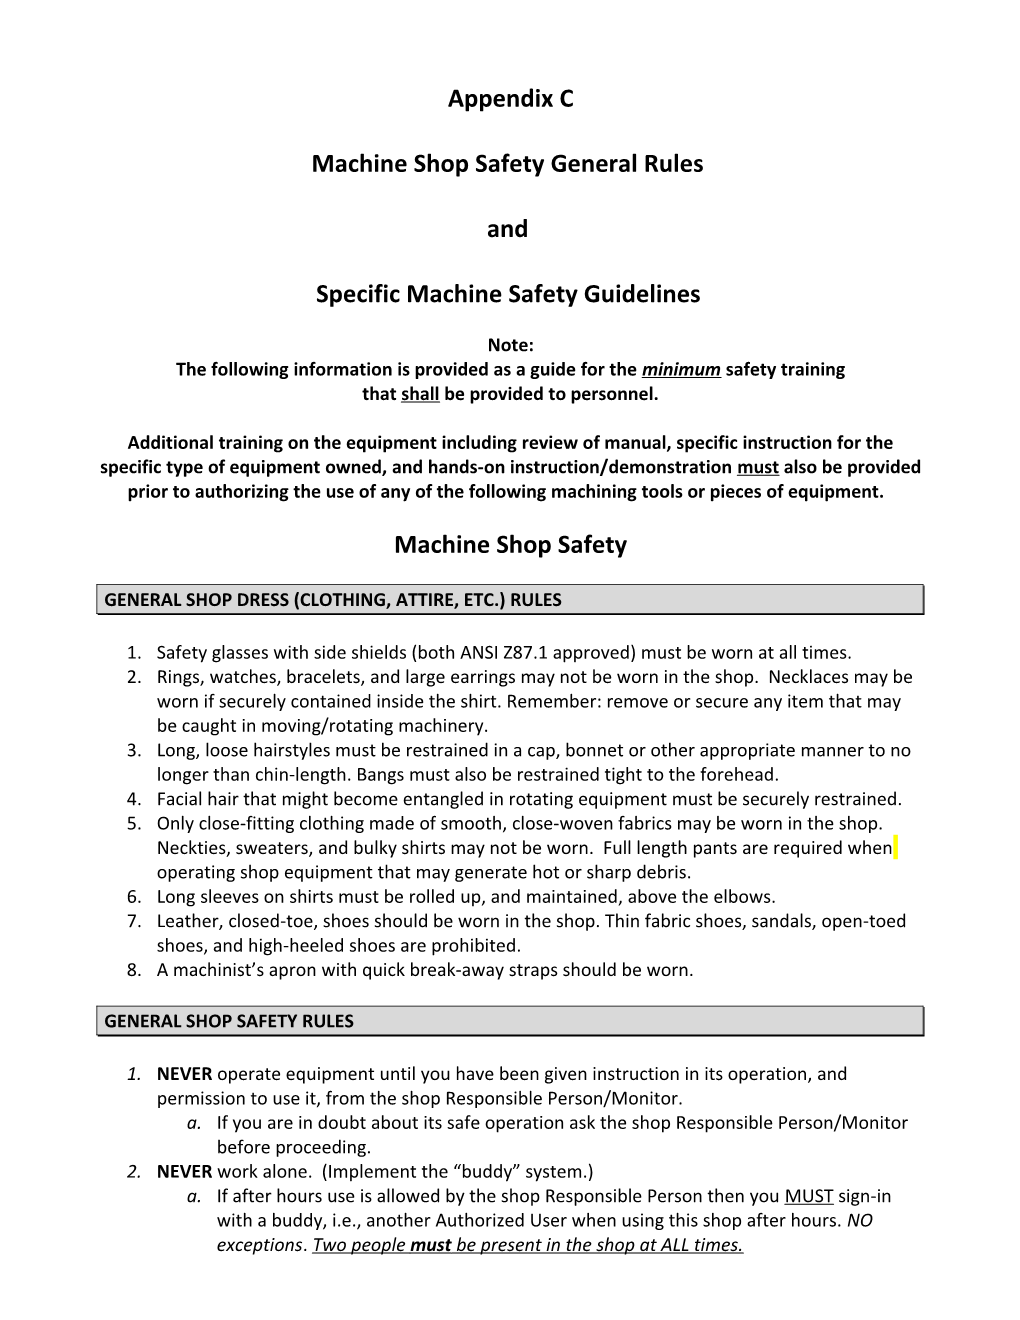 Machine Shop Safety General Rules